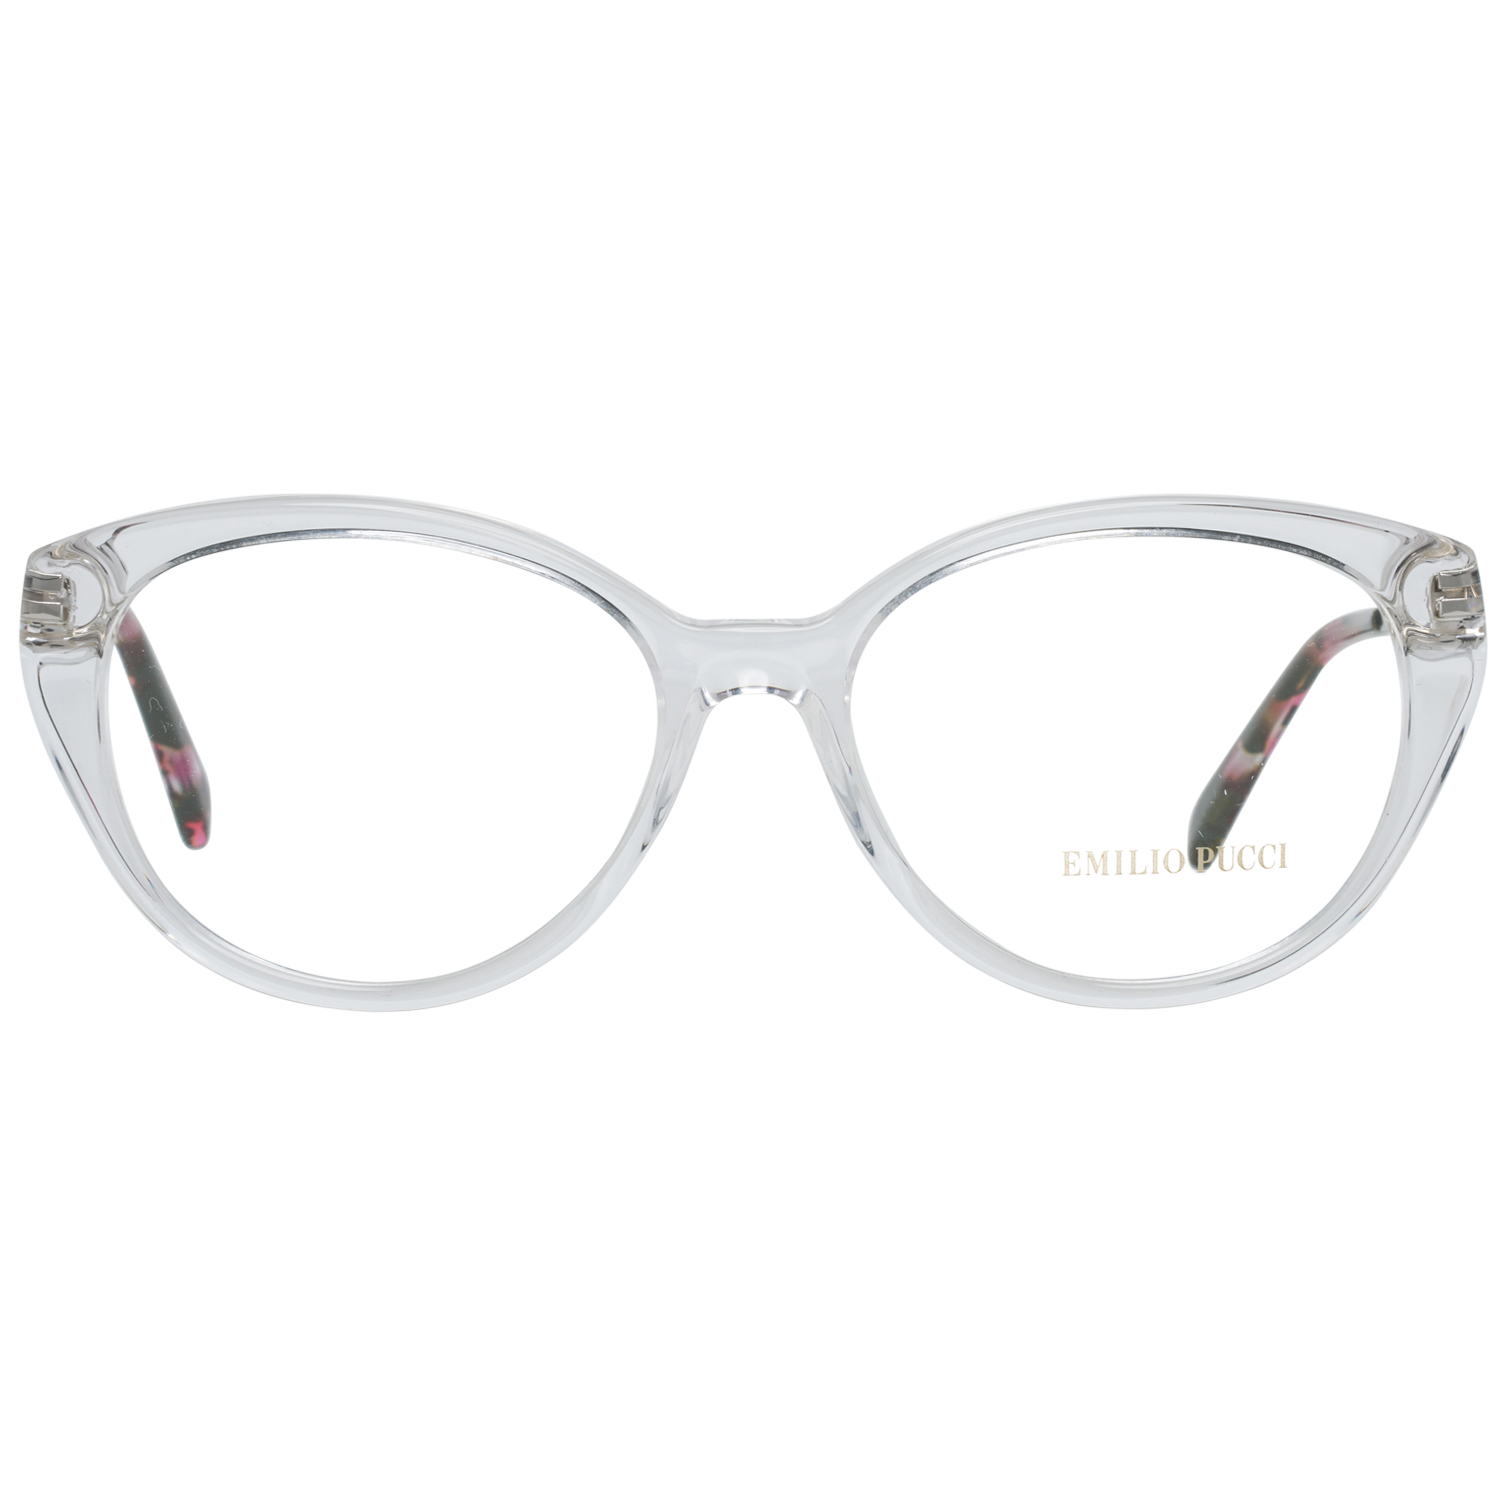 Emilio Pucci Optical Frame EP5063 026 53 Women
Frame color: Transparent
Lenses width: 53
Lenses heigth: 41
Bridge length: 16
Frame width: 133
Temple length: 140
Shipment includes: Case, Cleaning cloth
Style: Full-Rim
Spring hinge: Yes